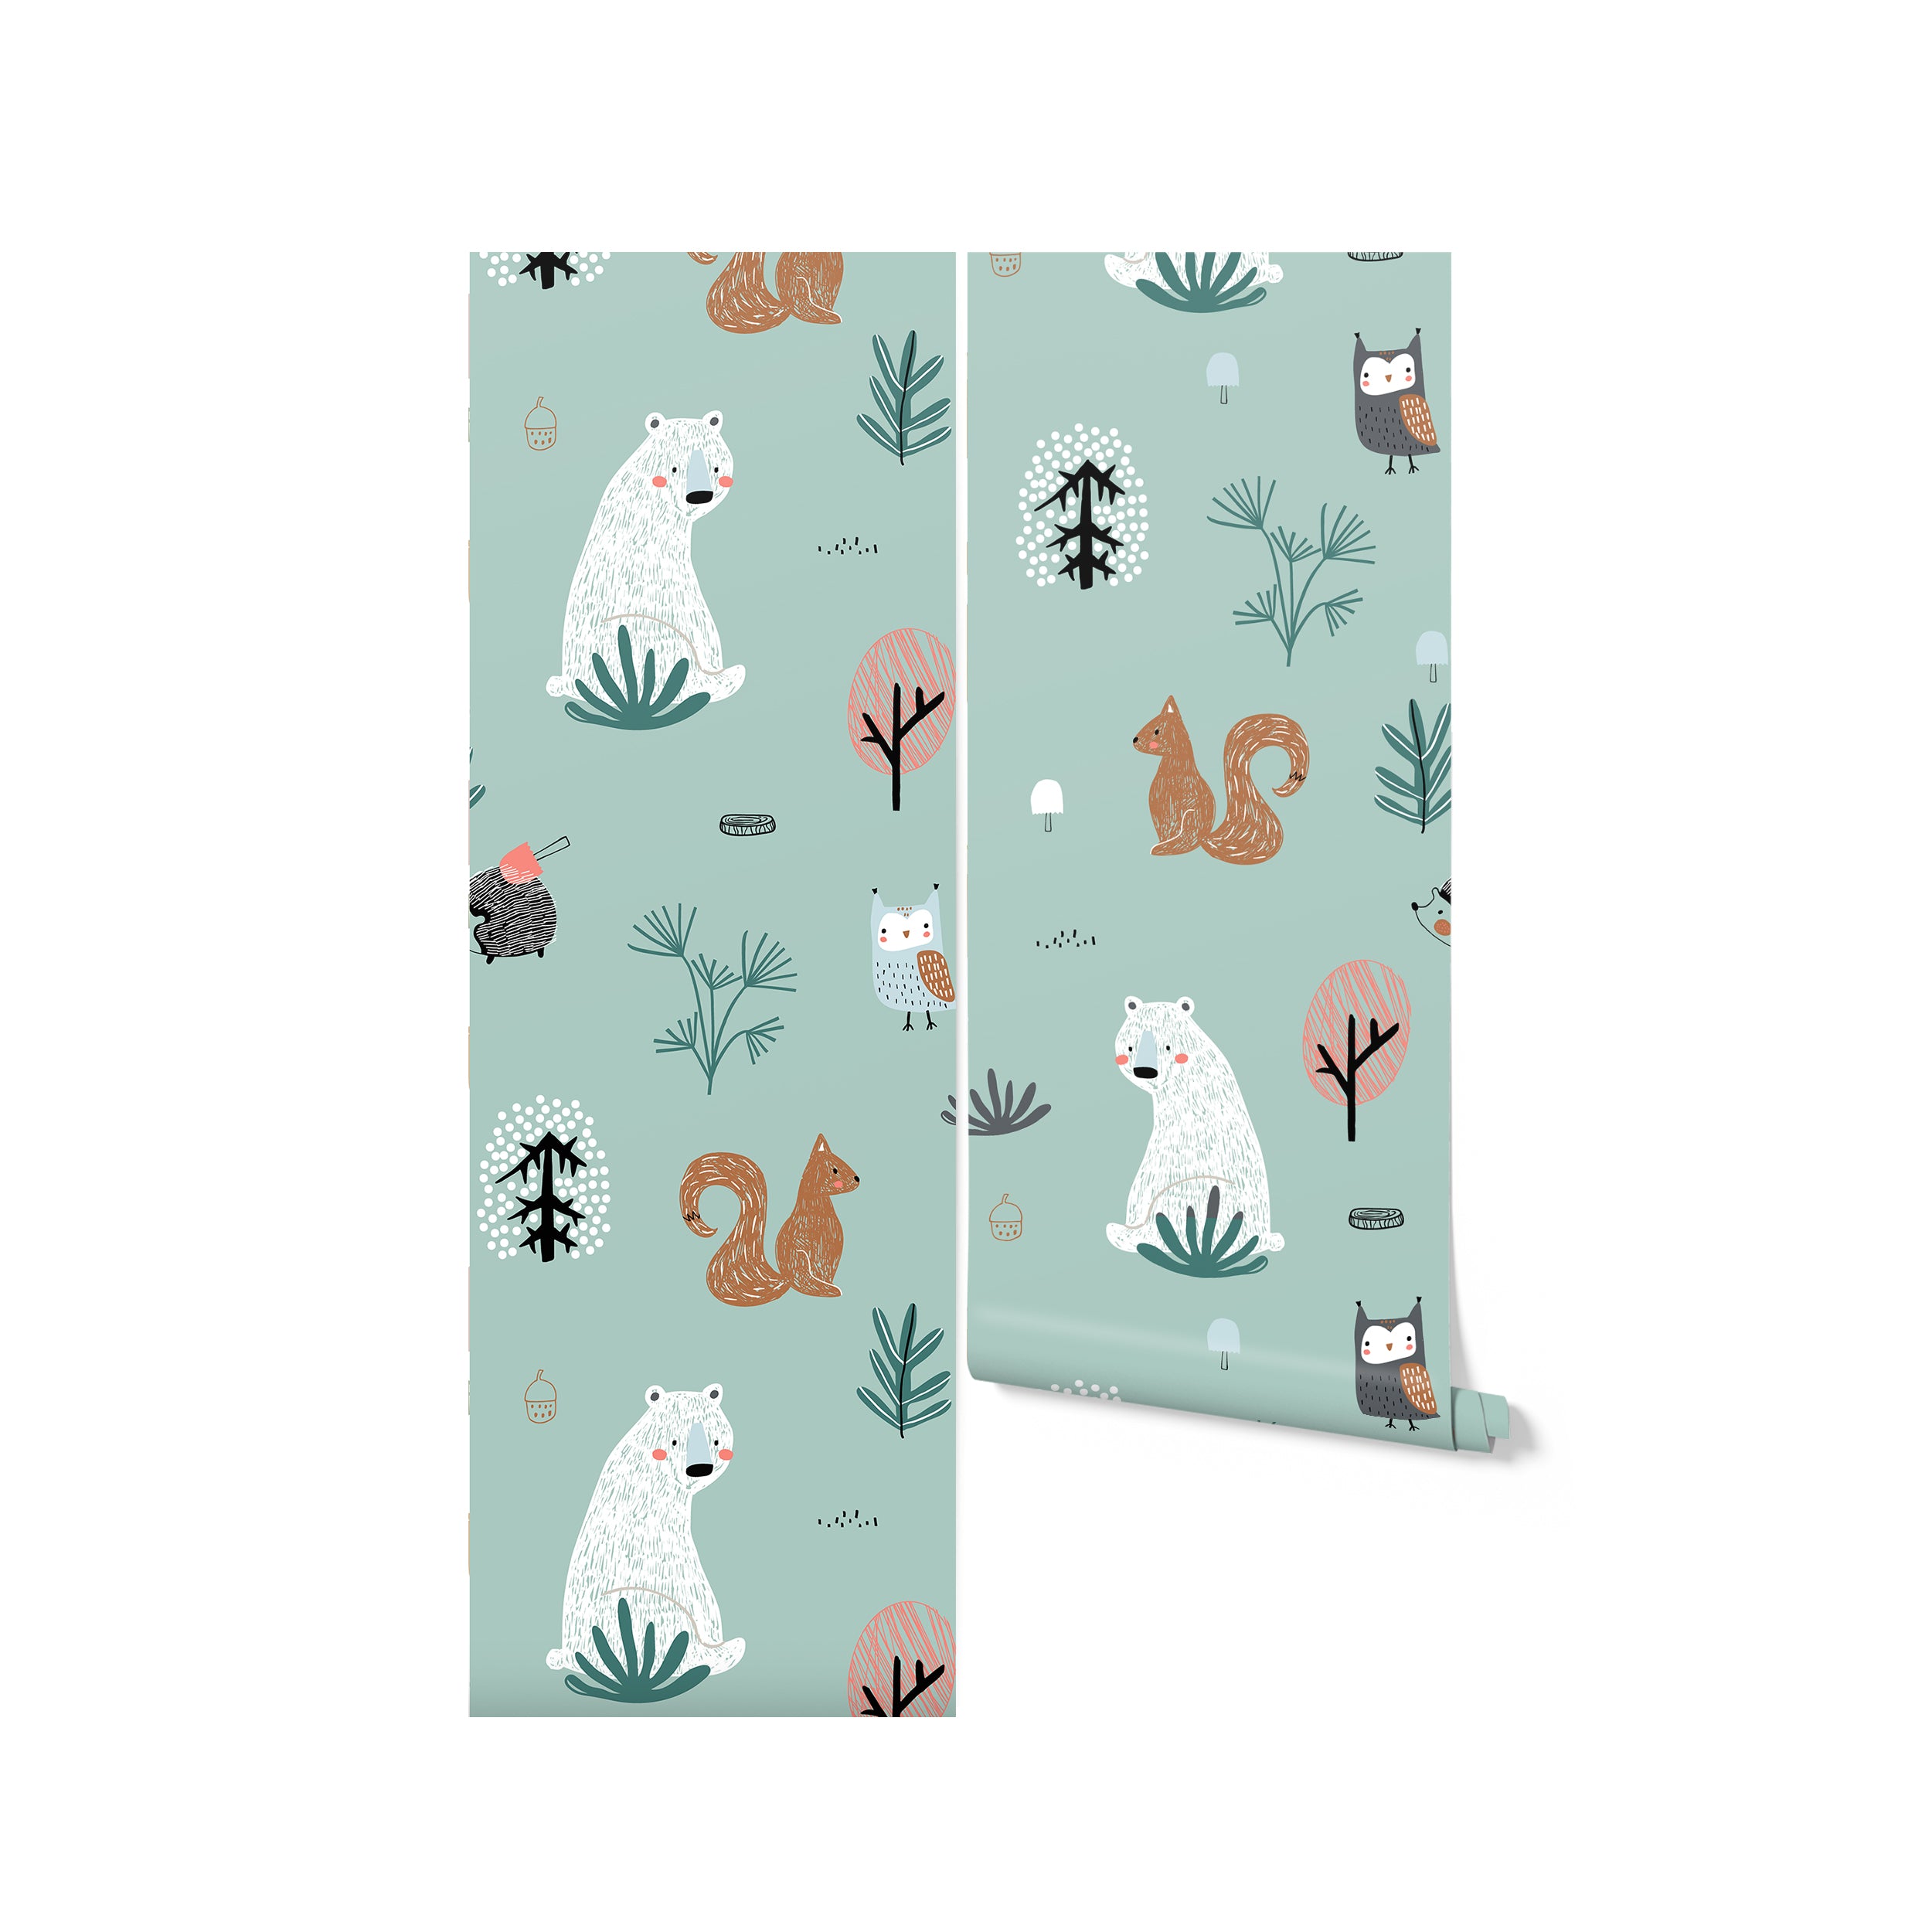 This image presents a roll of "Kids Wallpaper - Forest Critters - 50 inches." It displays a continuous pattern of large woodland creatures and plants on a teal background, perfect for creating a playful and soothing environment in children's spaces.